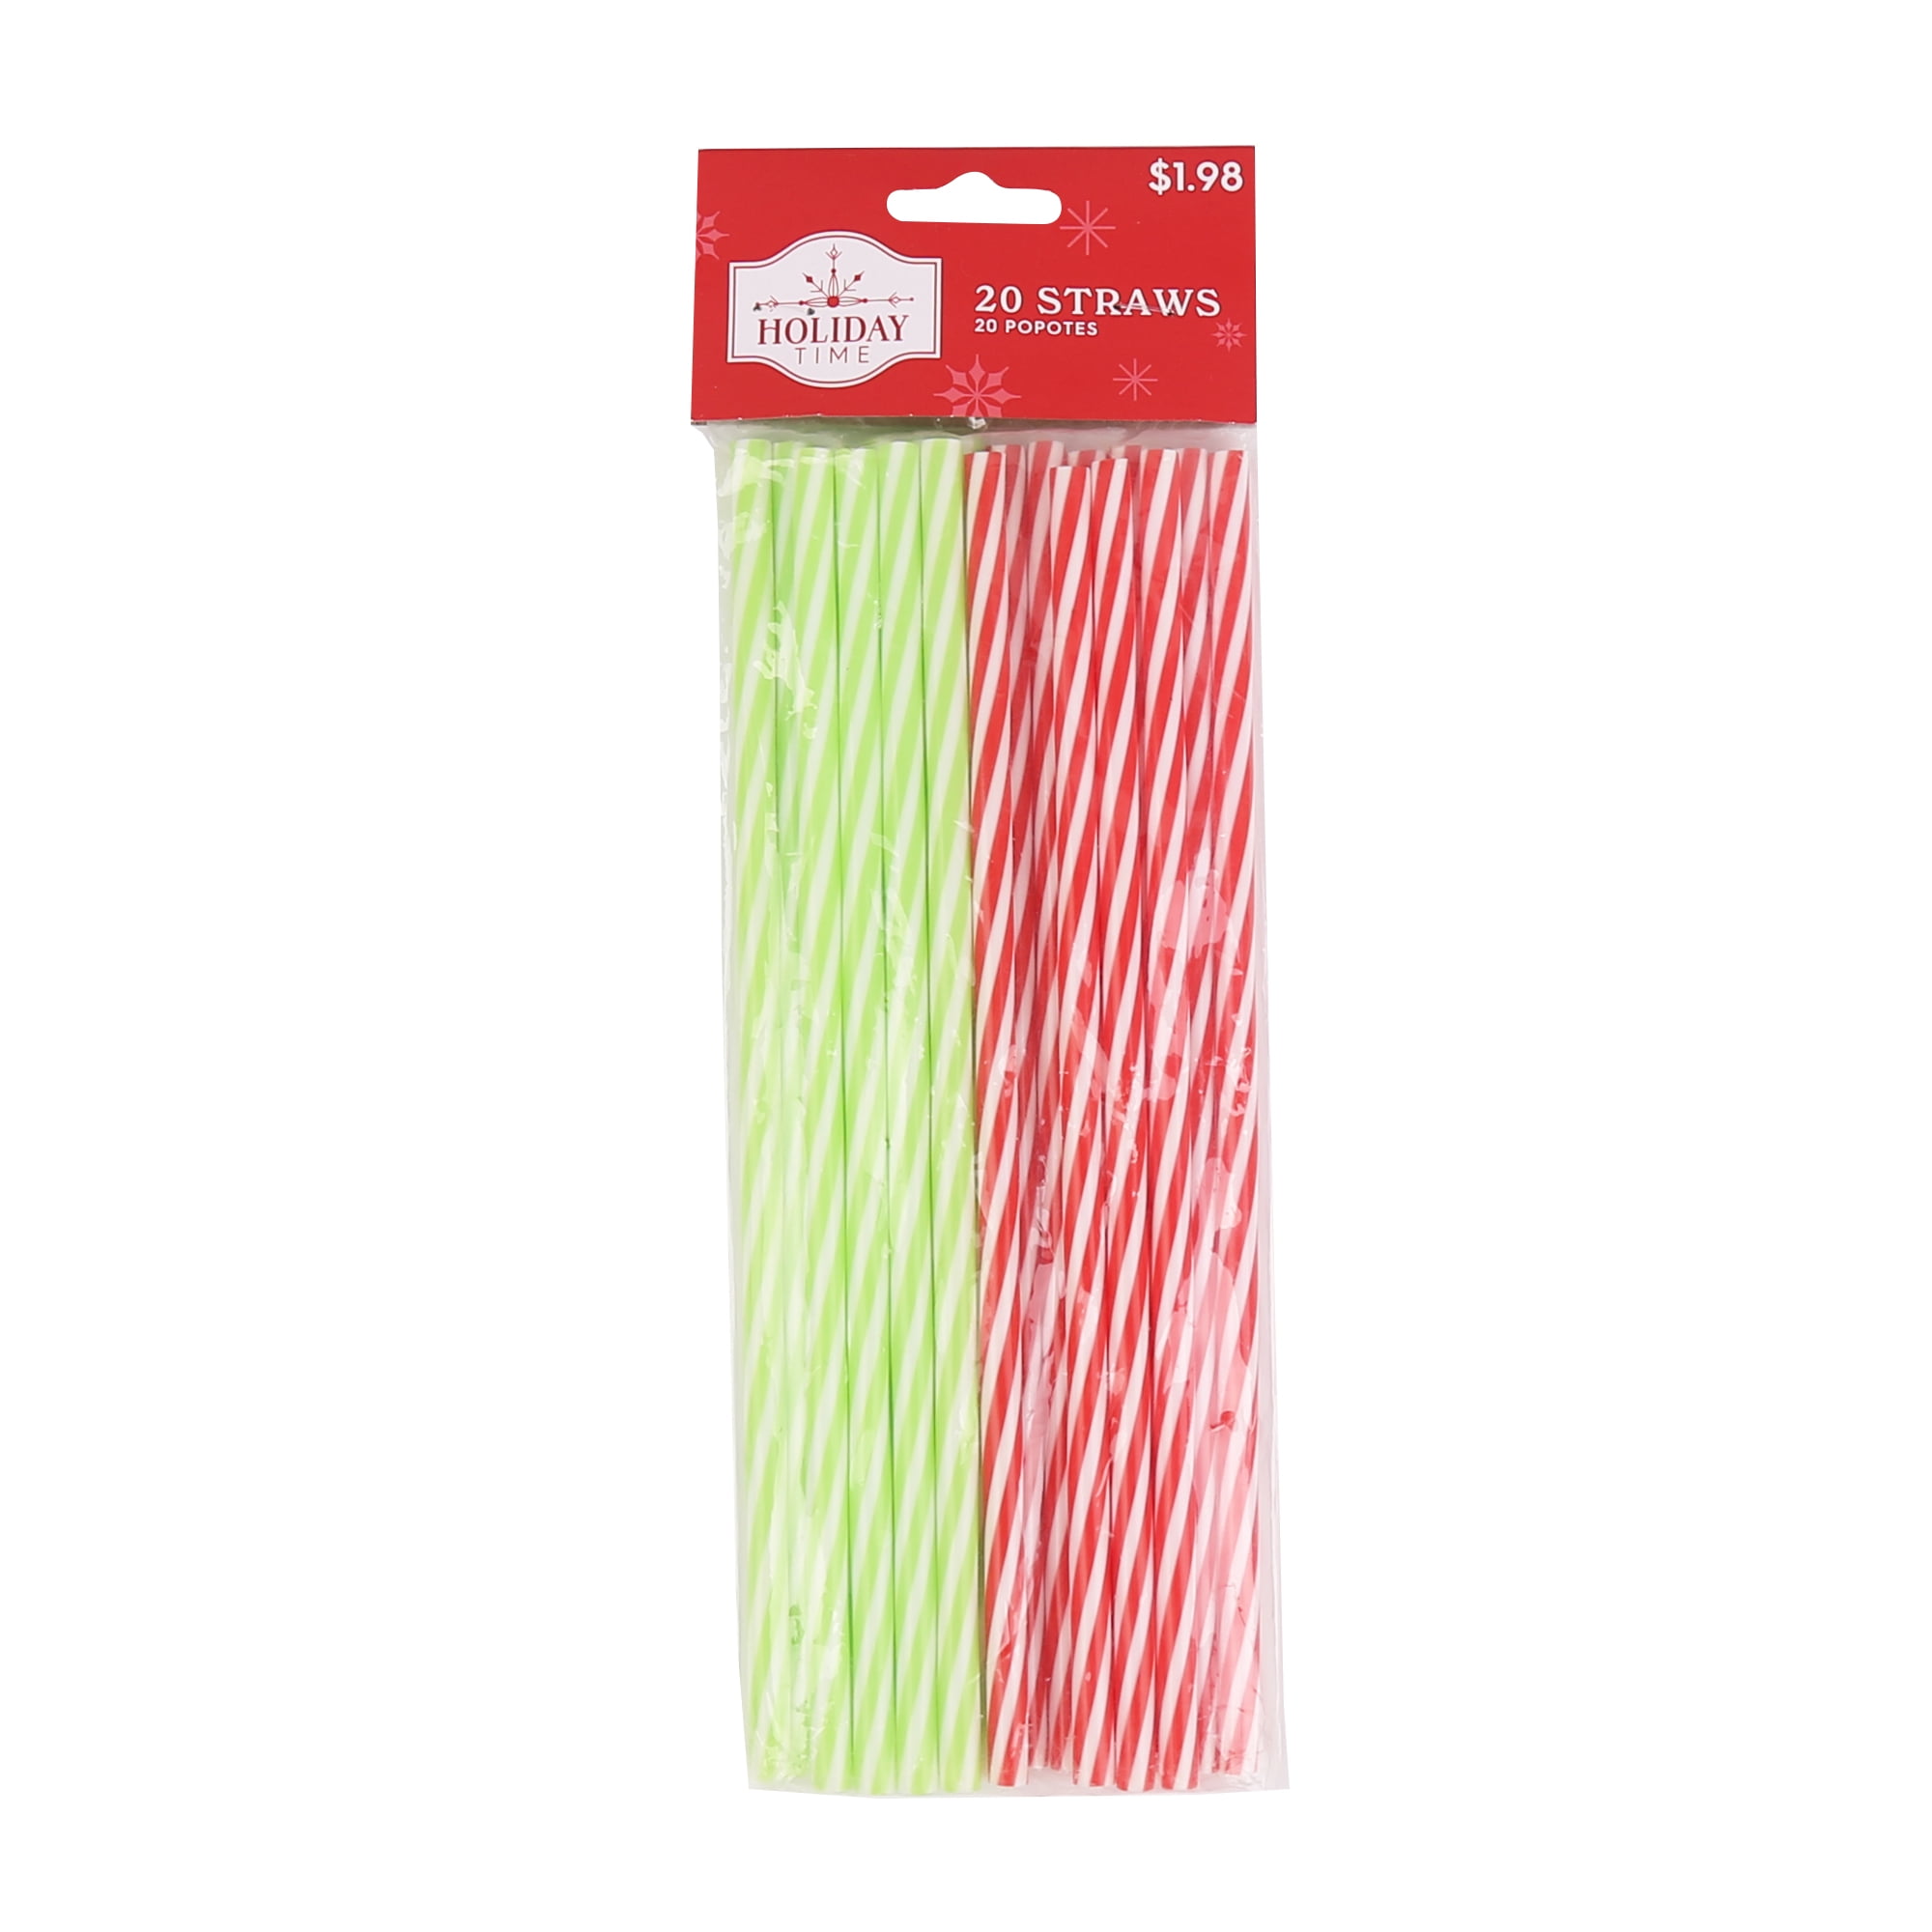 Holiday Time 20 Straw, Red  Stipes and Green Stipe Assorted in One Bag, Party, Straws